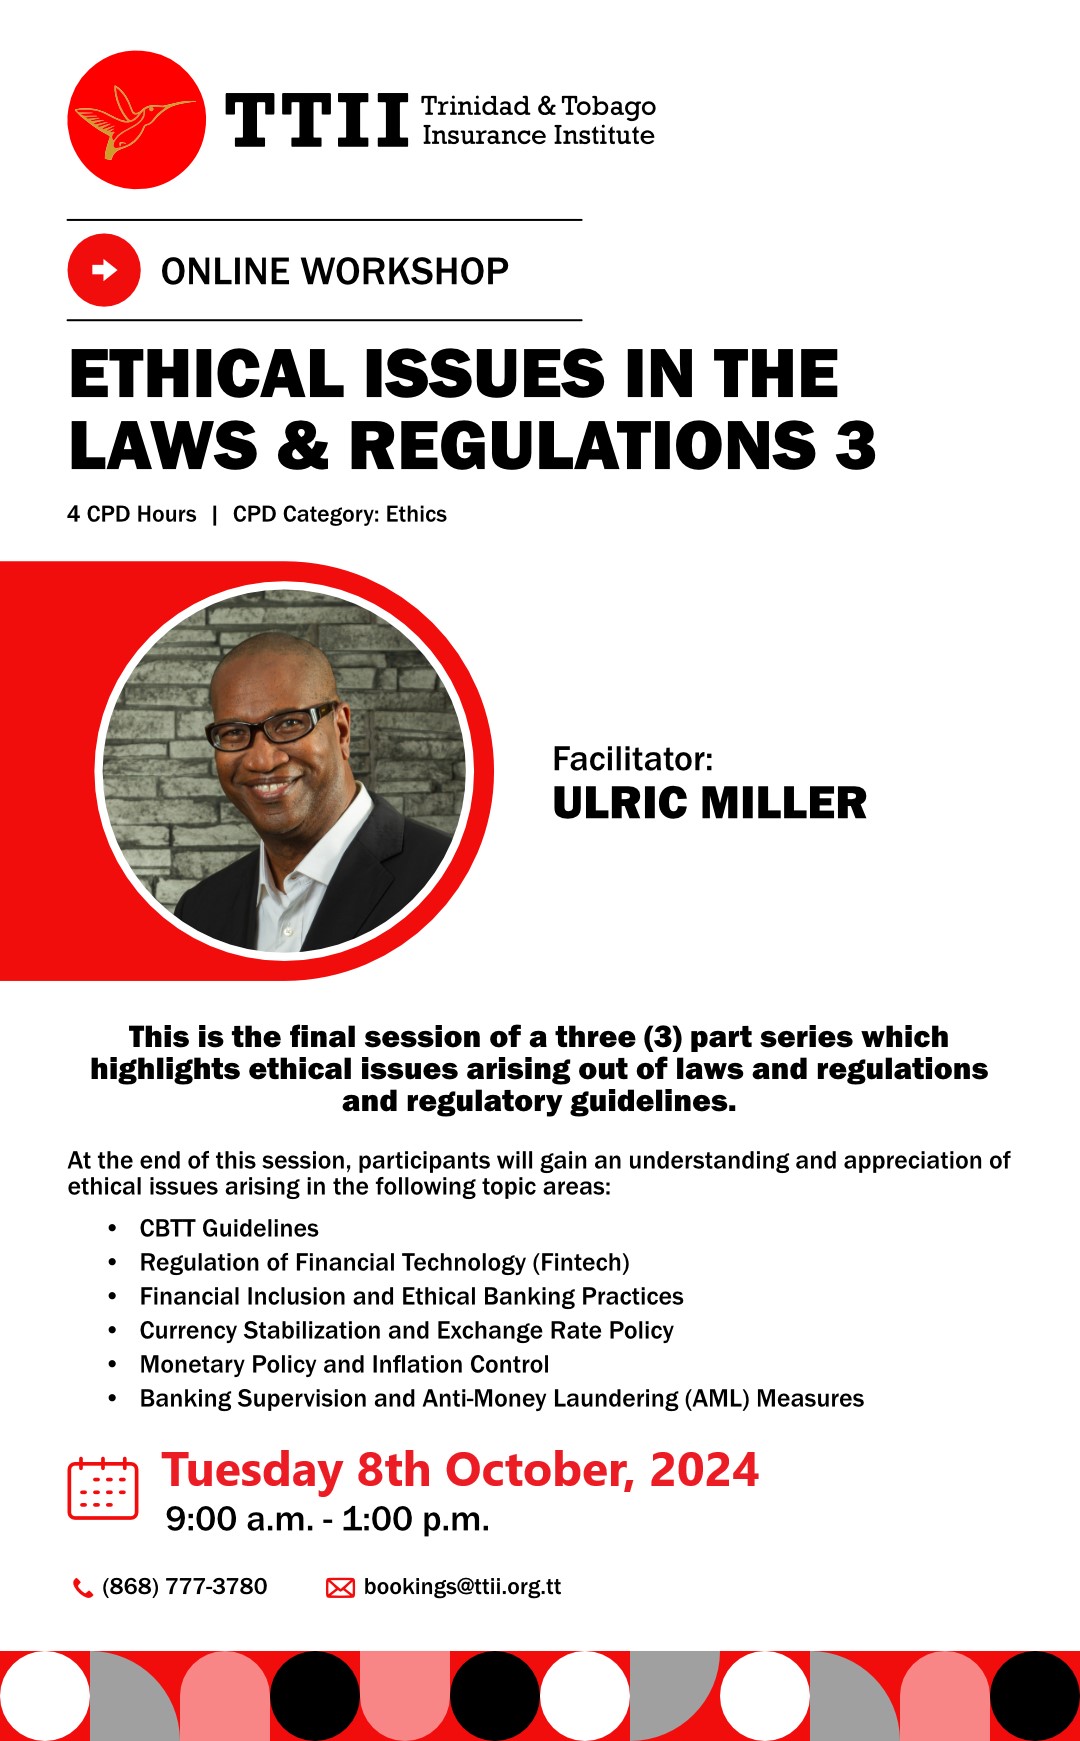 Ethical Issues in the Laws & Regulations 3